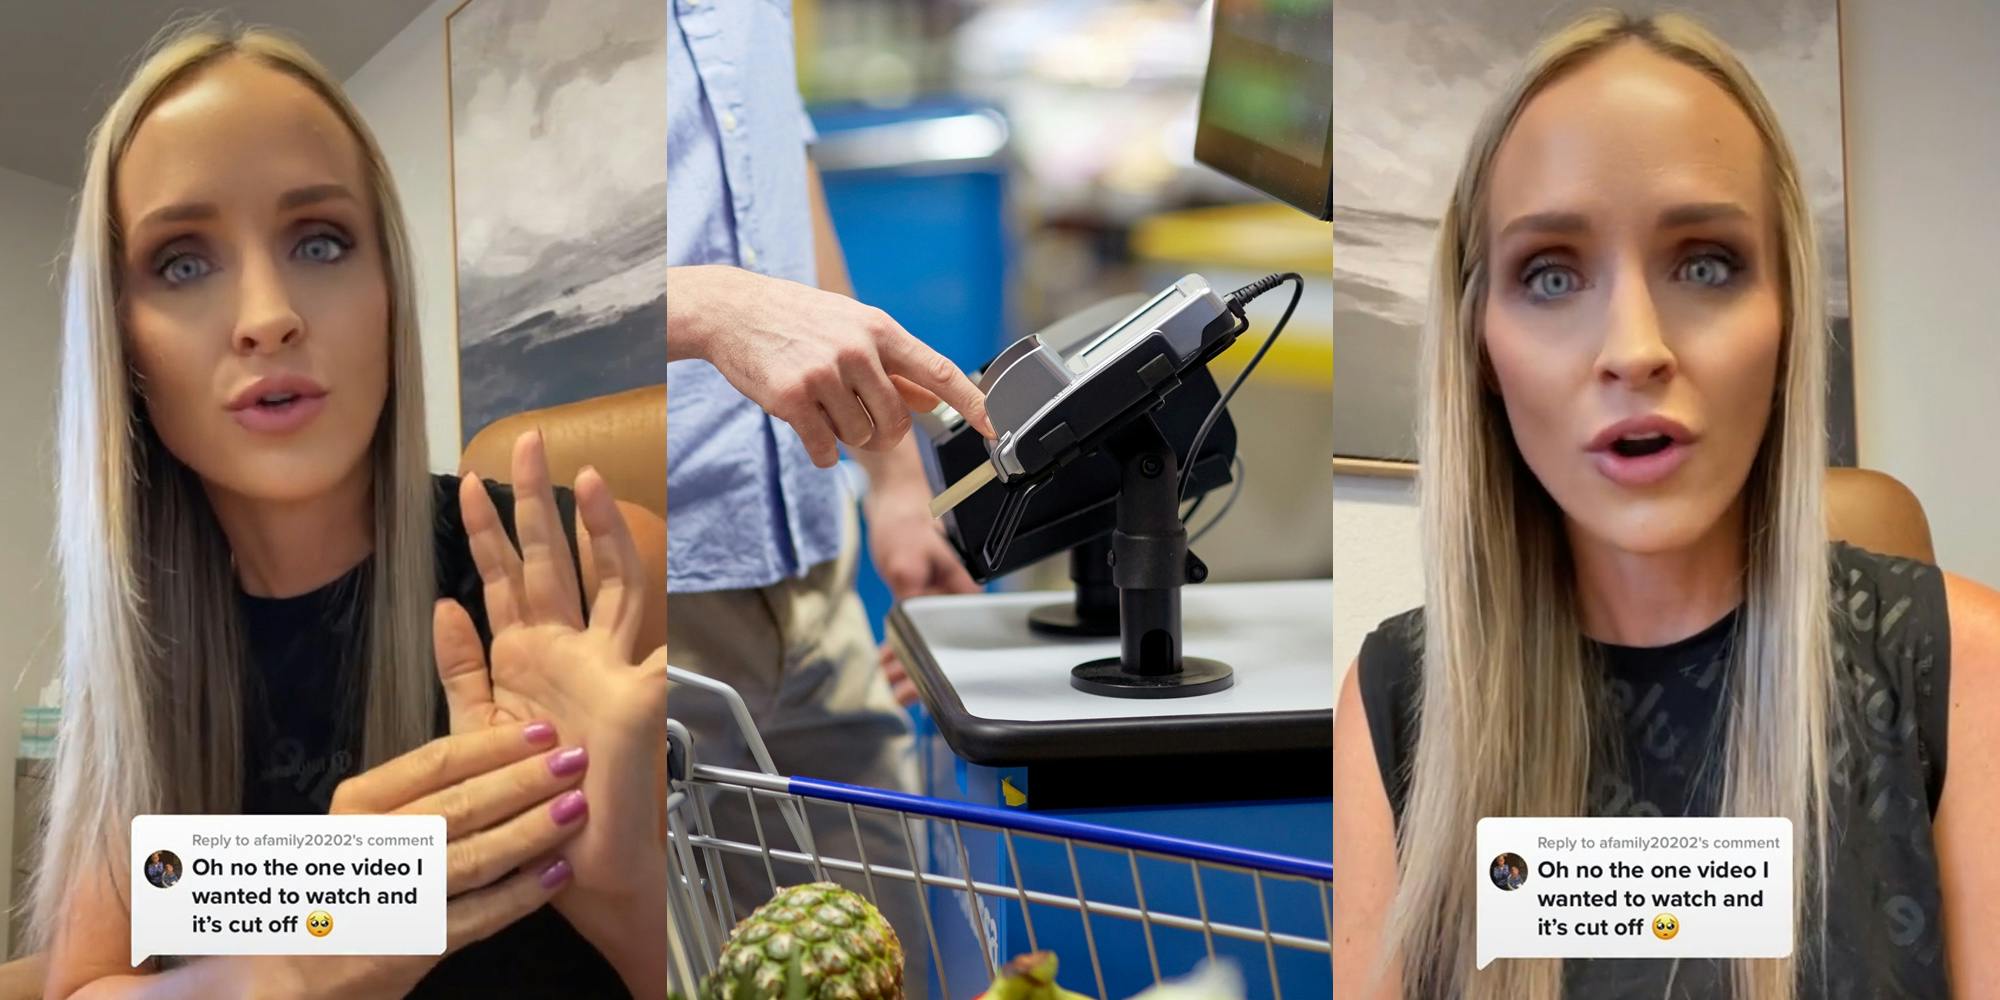 woman speaking and hand gesturing caption "Oh no the one video I wanted to watch and it's cut off" (L) person using self checkout at store (c) woman speaking caption "Oh no the one video I wanted to watch and it's cut off" (r)